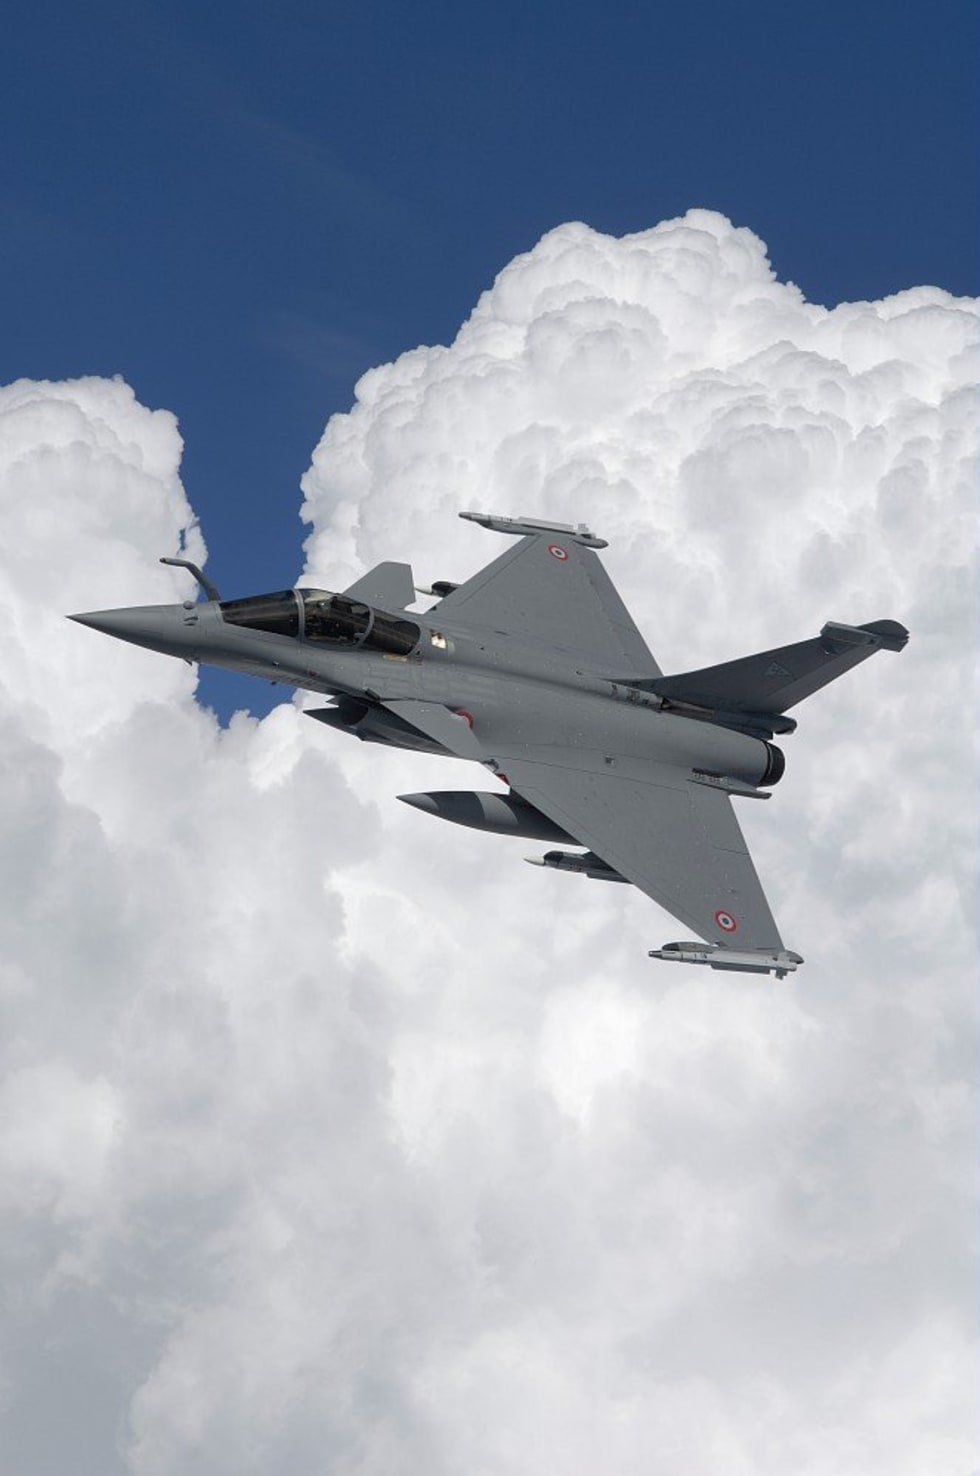 The Rafale, the sheer power of data fusion